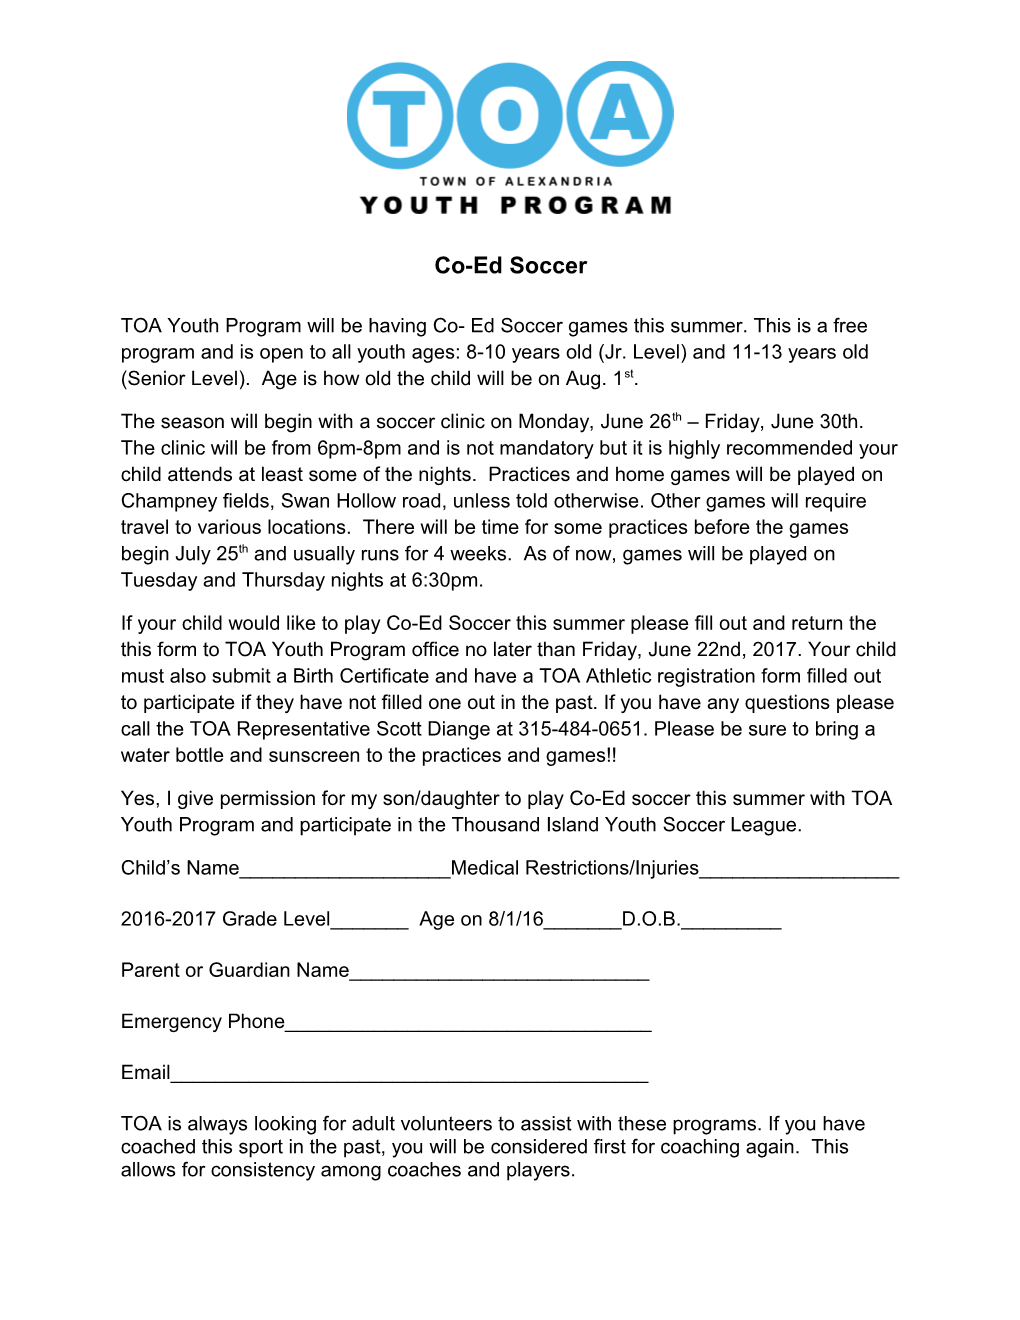 TOA Youth Program Will Be Having Co- Ed Soccer Games This Summer. This Is a Free Program